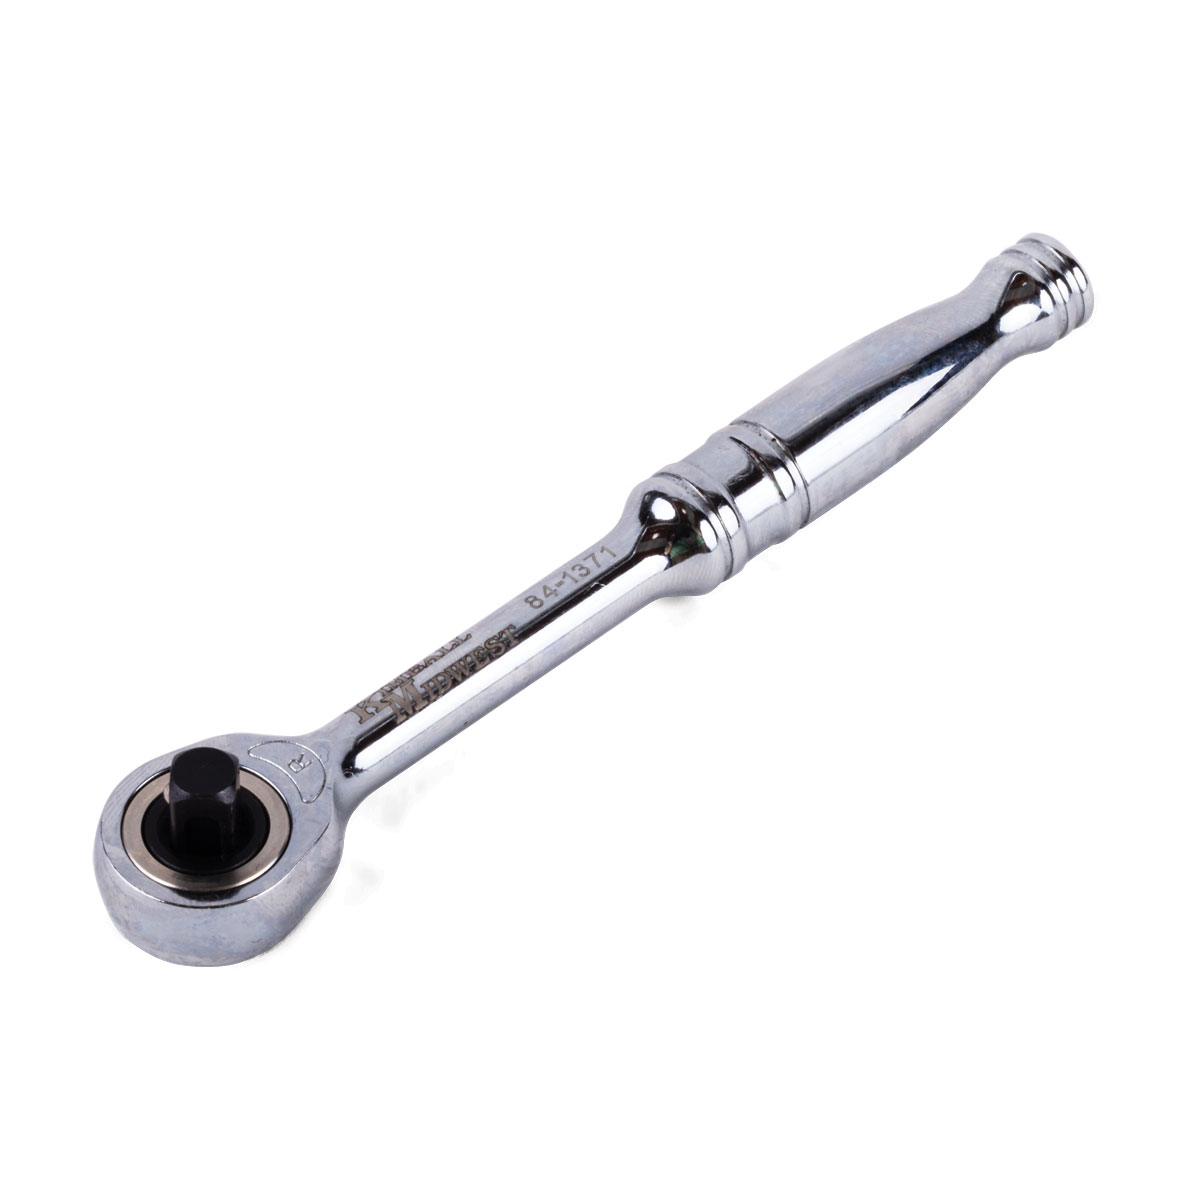 1/4" Gearless Ratchet Wrench